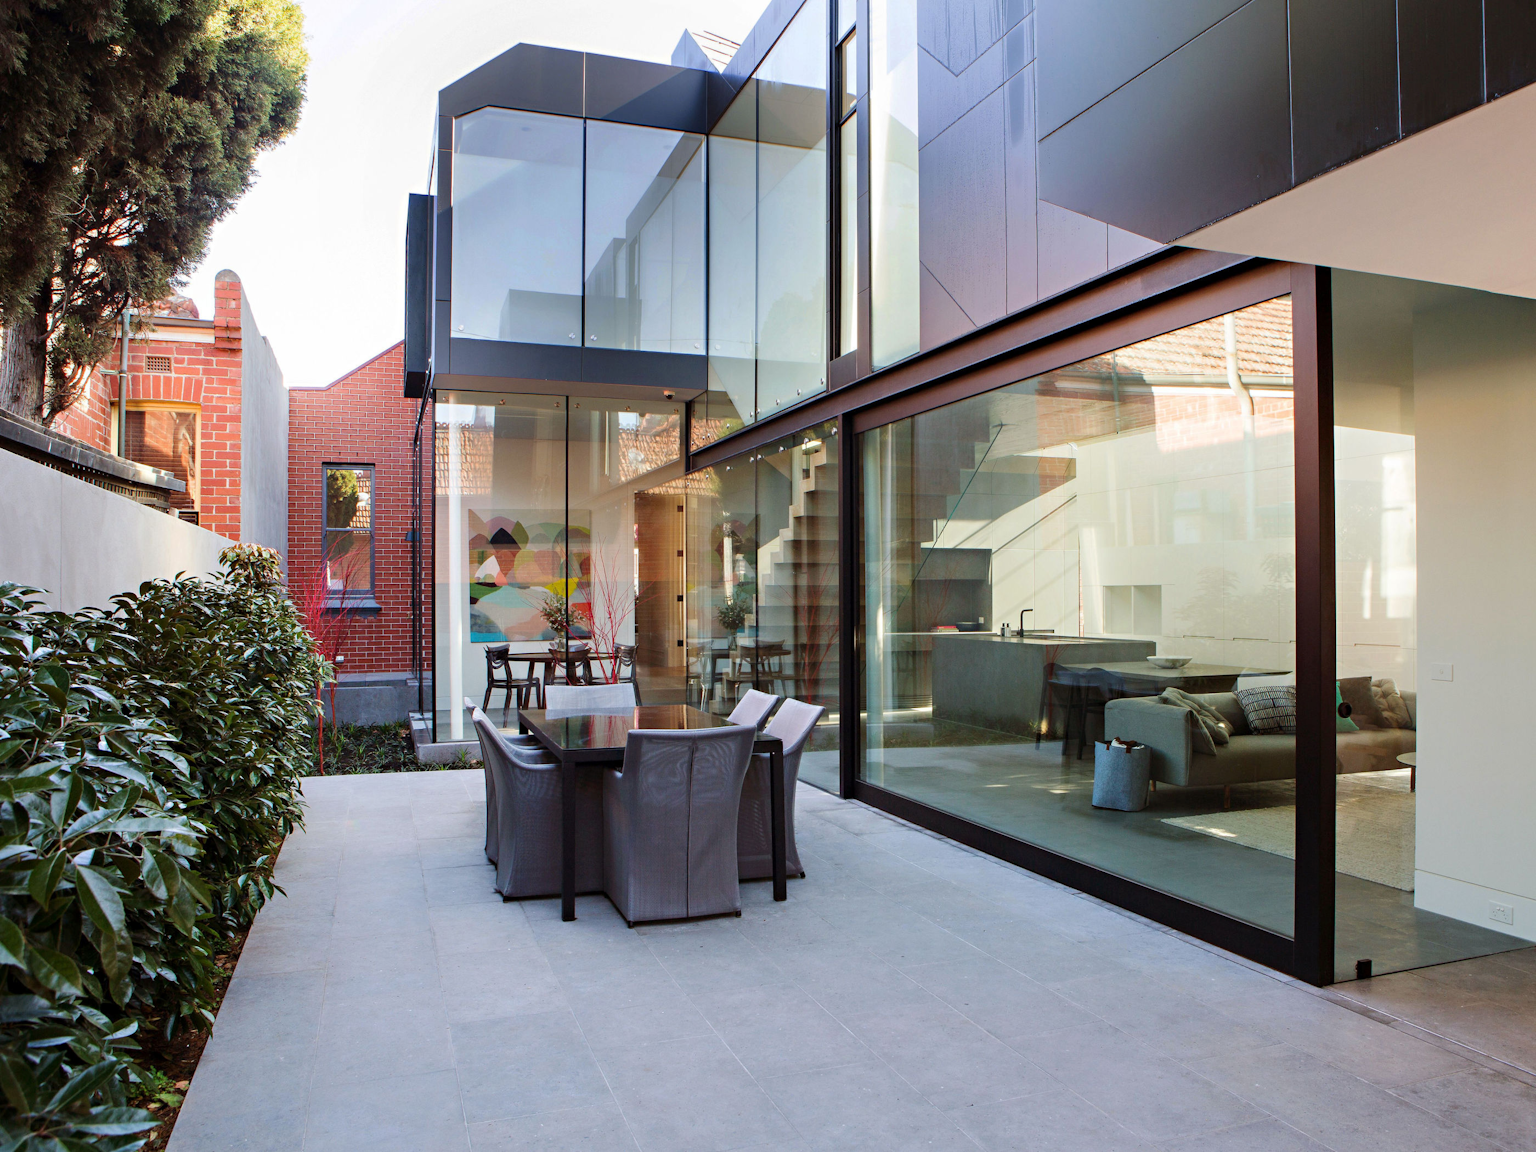 Natural stone used indoors and out in contemporary courtyard design.